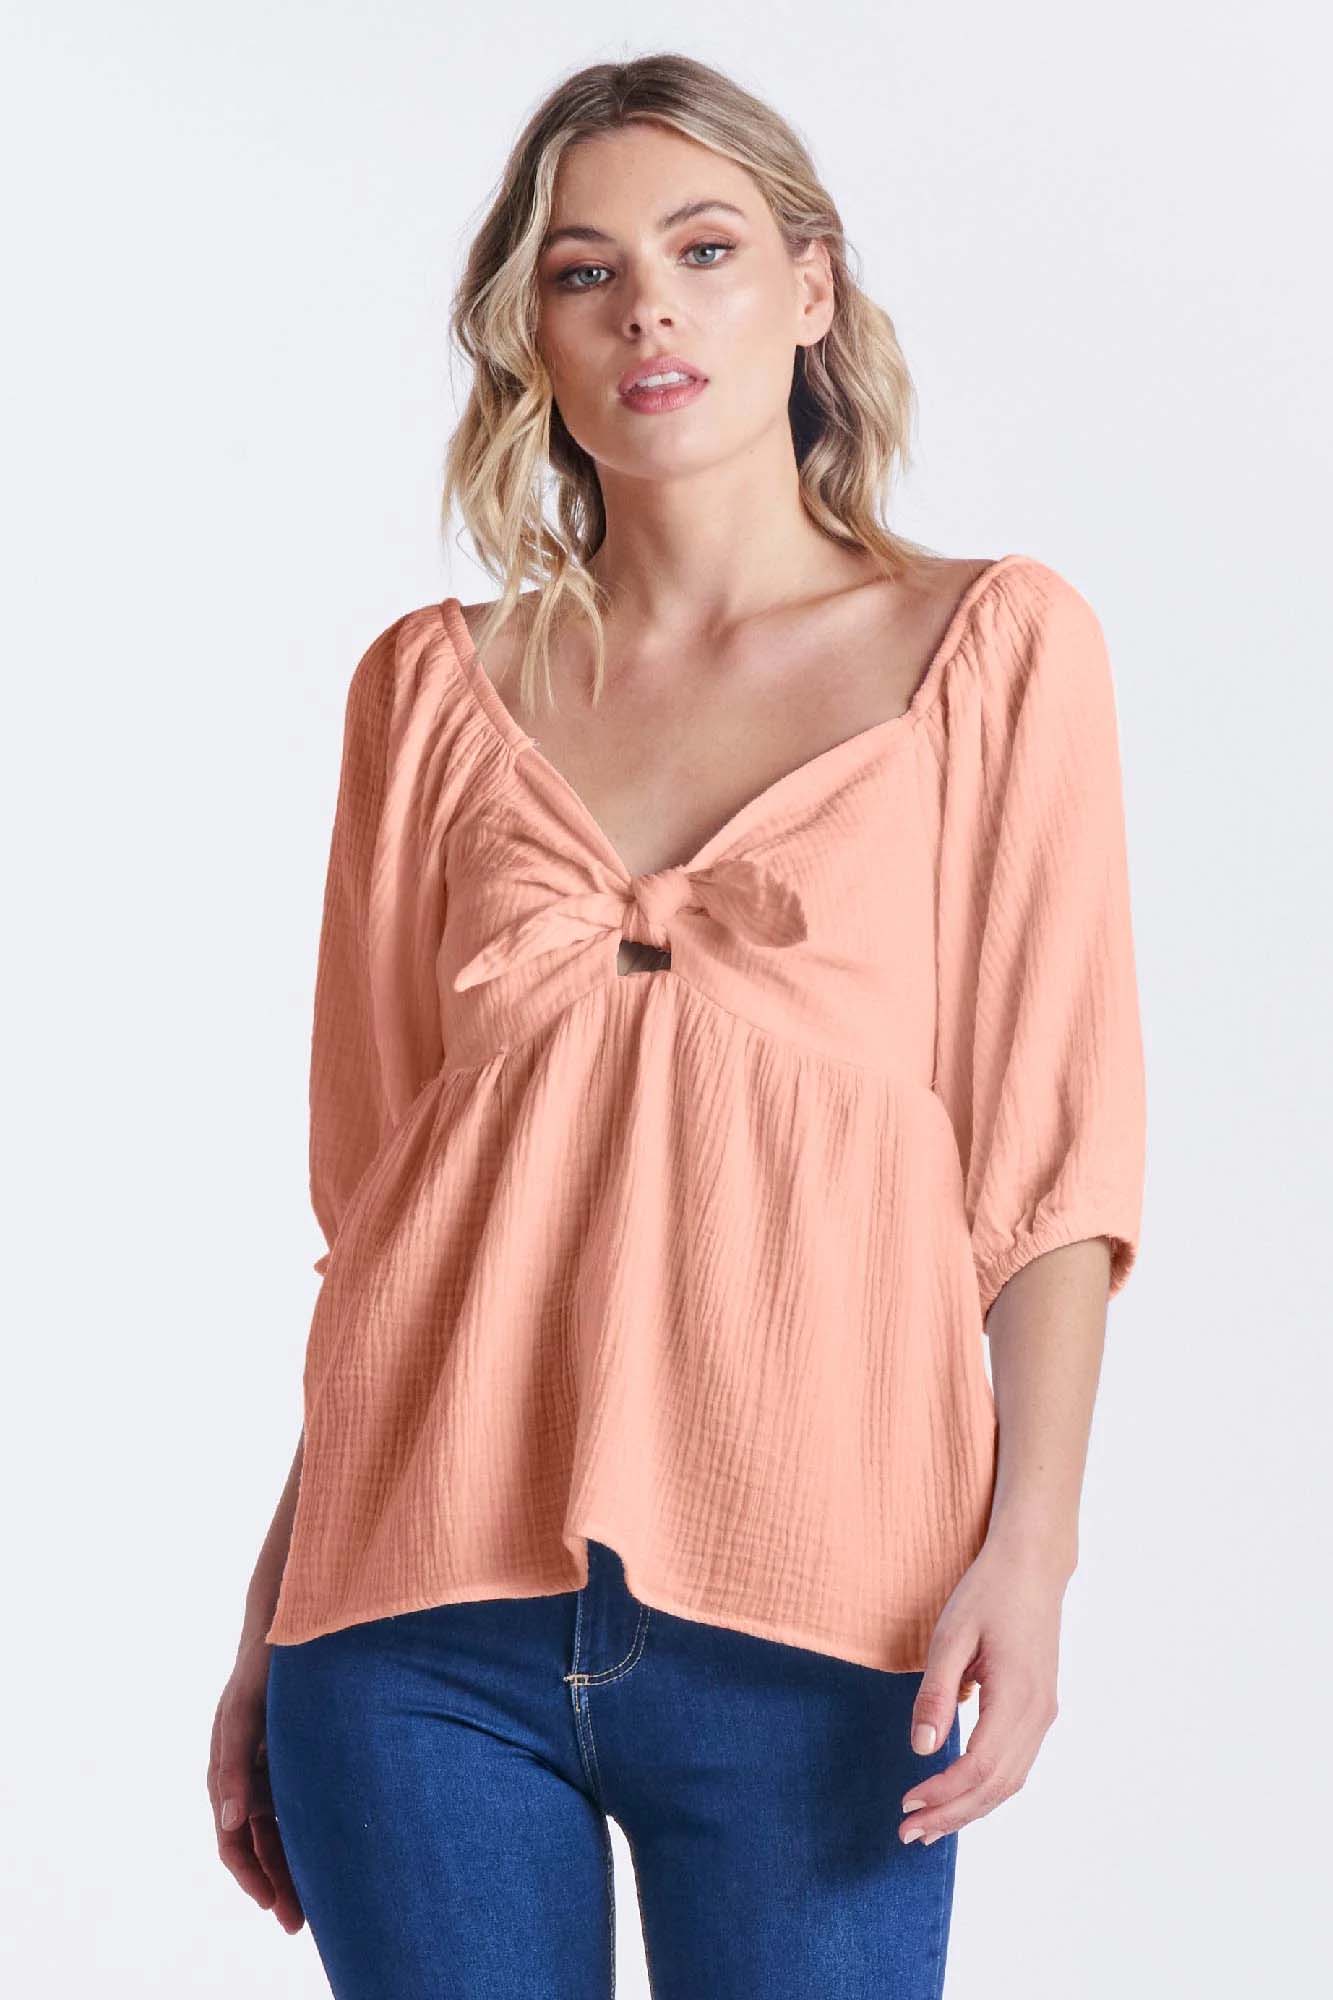 Sass Tilly Reversible Top in Peach - Hey Sara